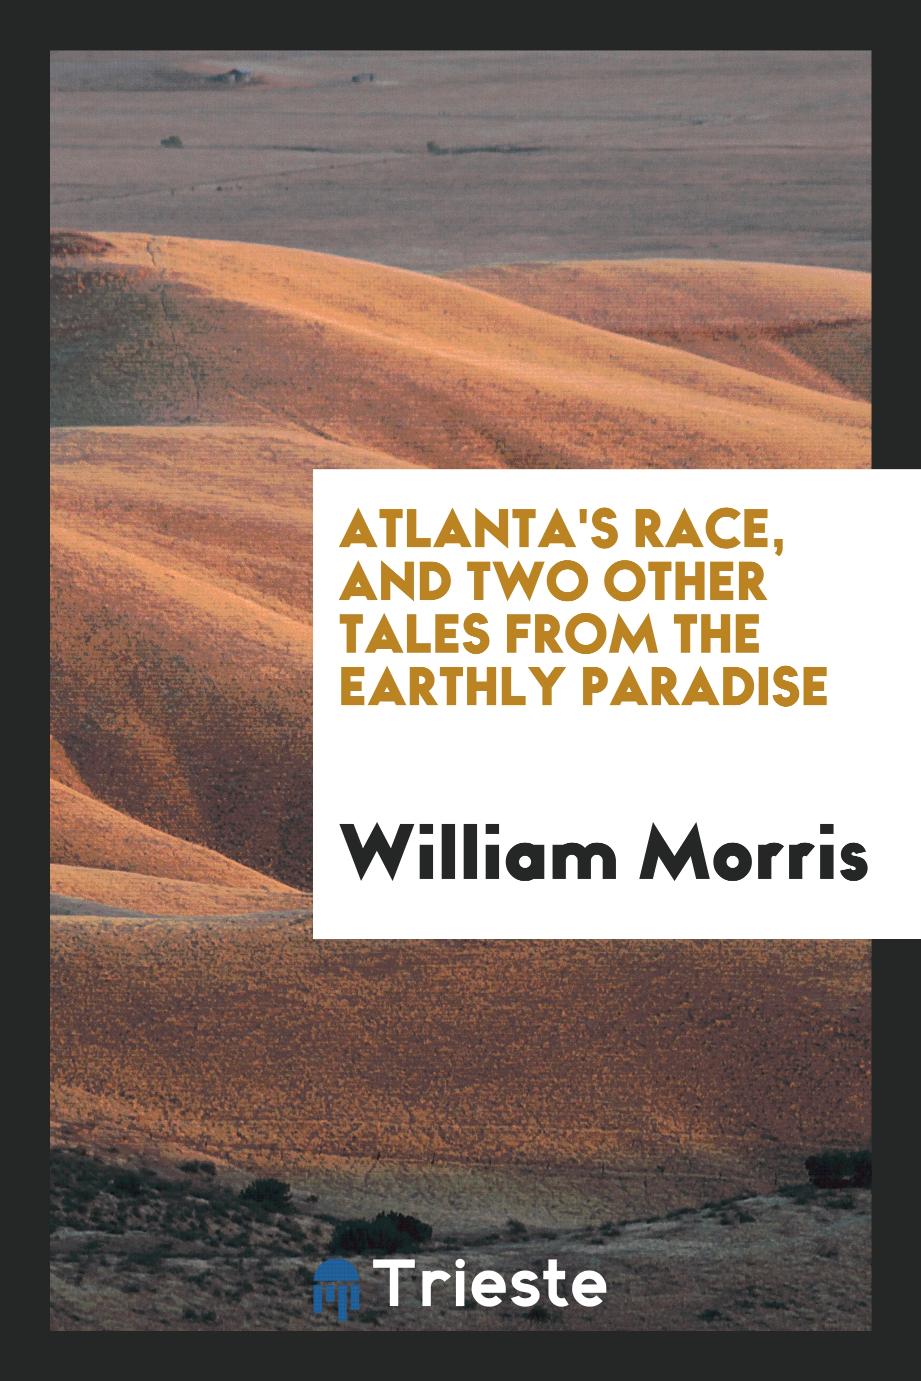 William Morris - Atlanta's race, and two other tales from The earthly paradise